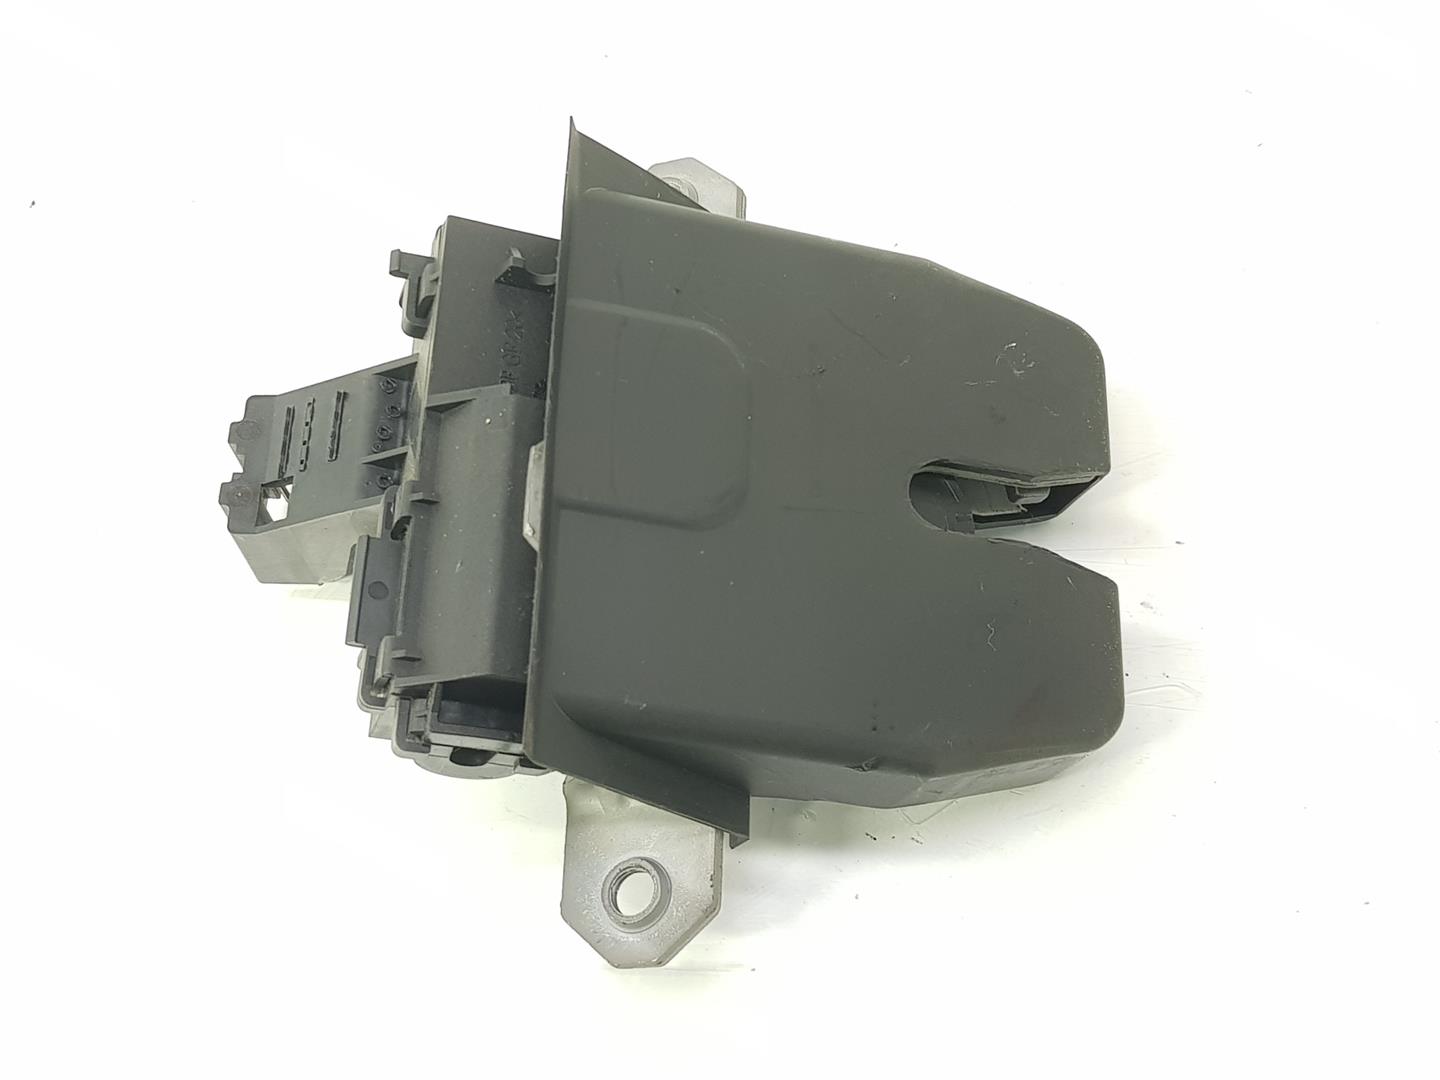 FORD Focus 2 generation (2004-2011) Tailgate Boot Lock 8M51R442A66AC, 1570448, 4PINES 19741944